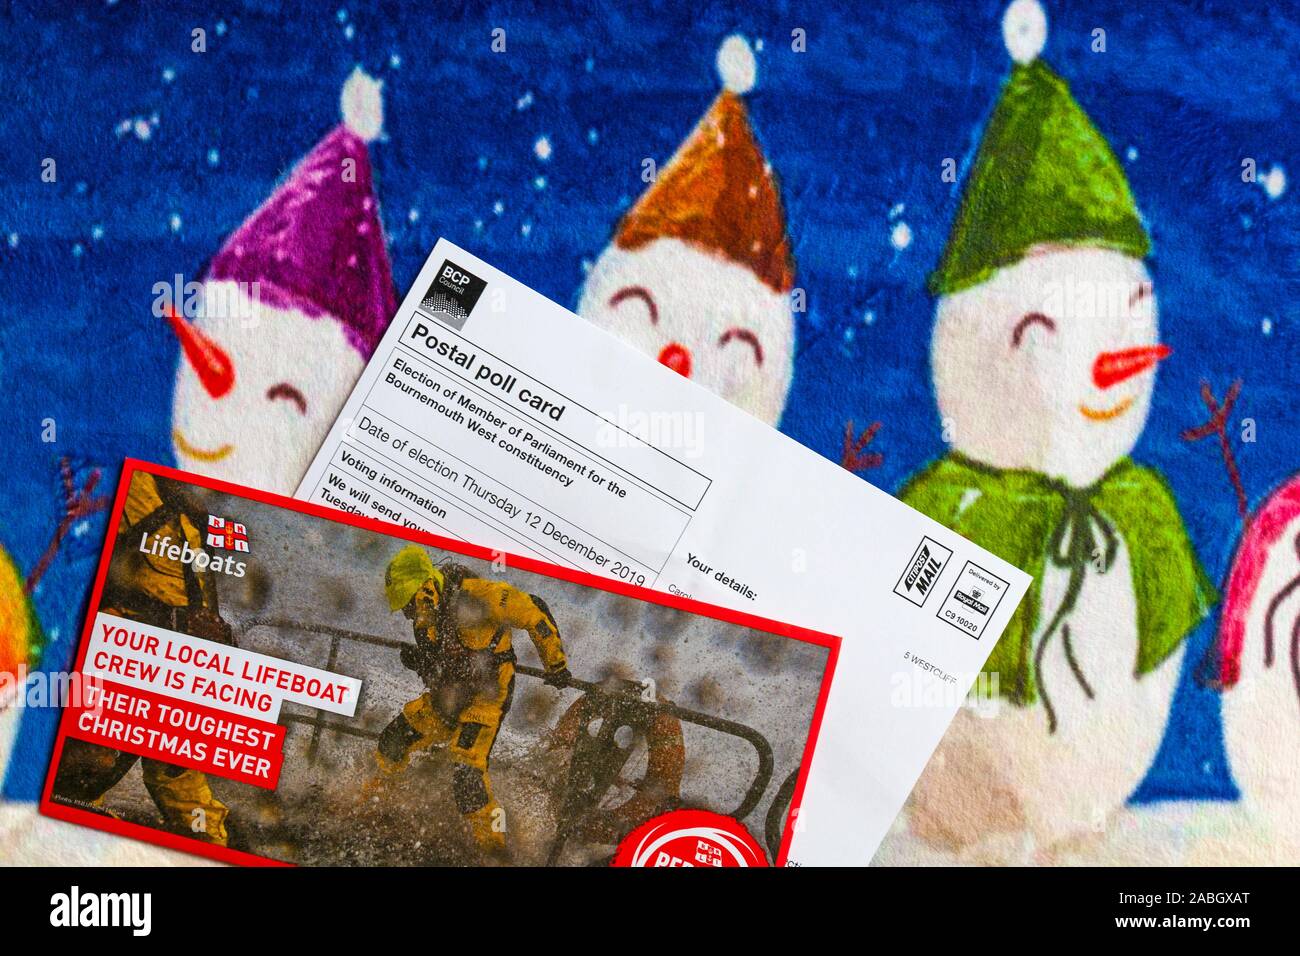 Post on Christmas mat including Postal Poll Card for forthcoming Parliamentary general election for 2019 in UK and RNLI Lifeboats Charity appeal Stock Photo